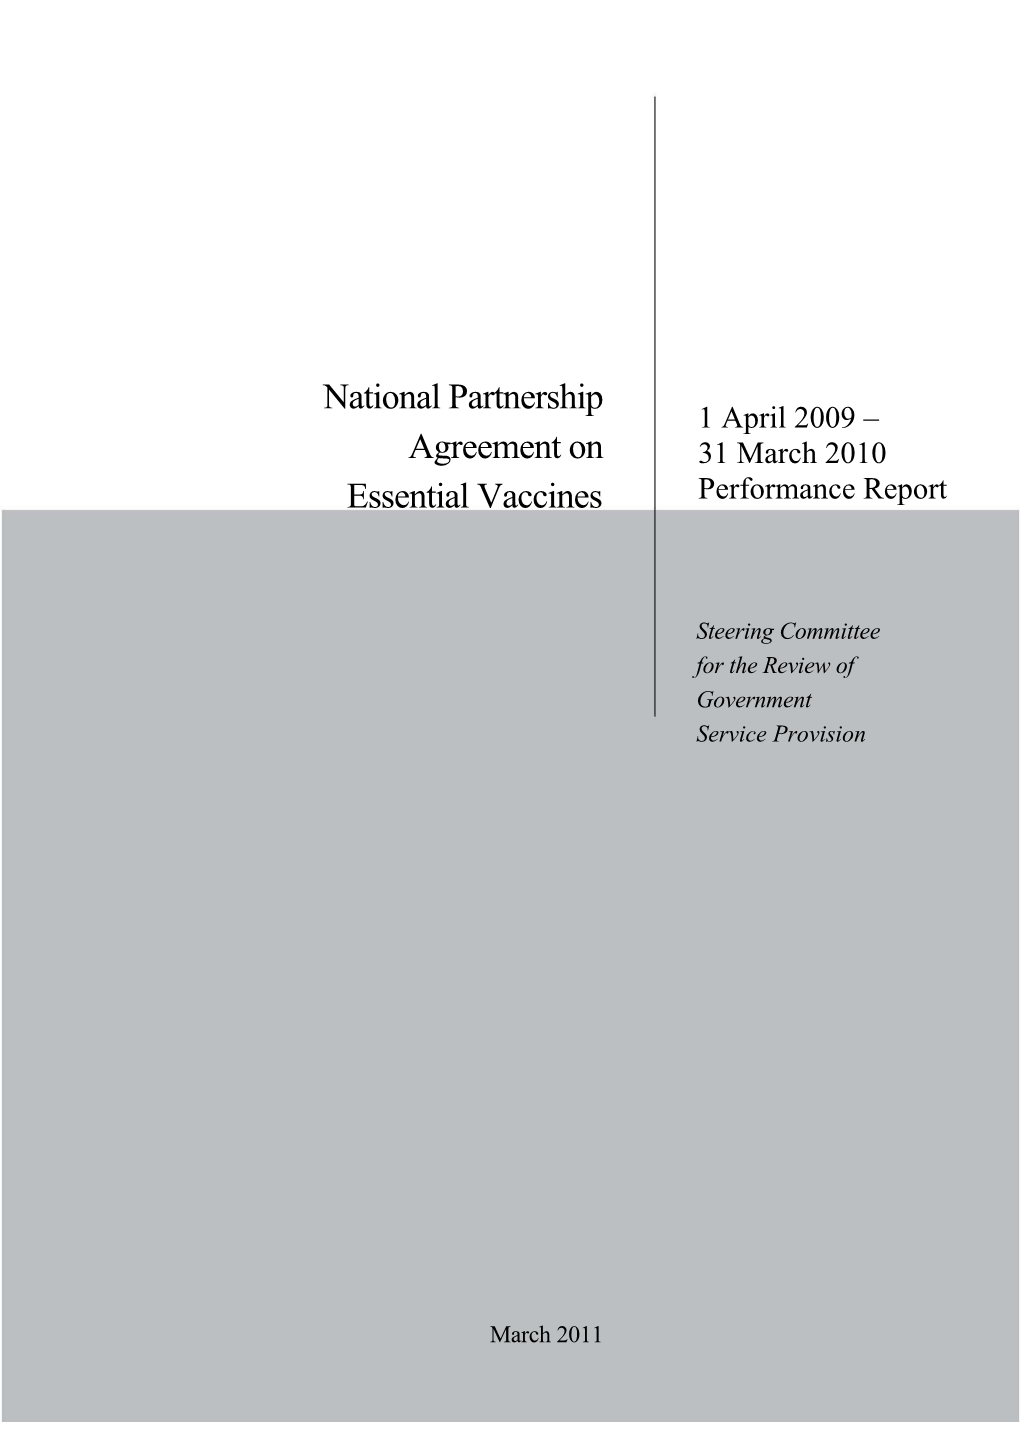 1 April 2009 to 31 March 2010 Performance Report - National Partnership Agreement on Essential